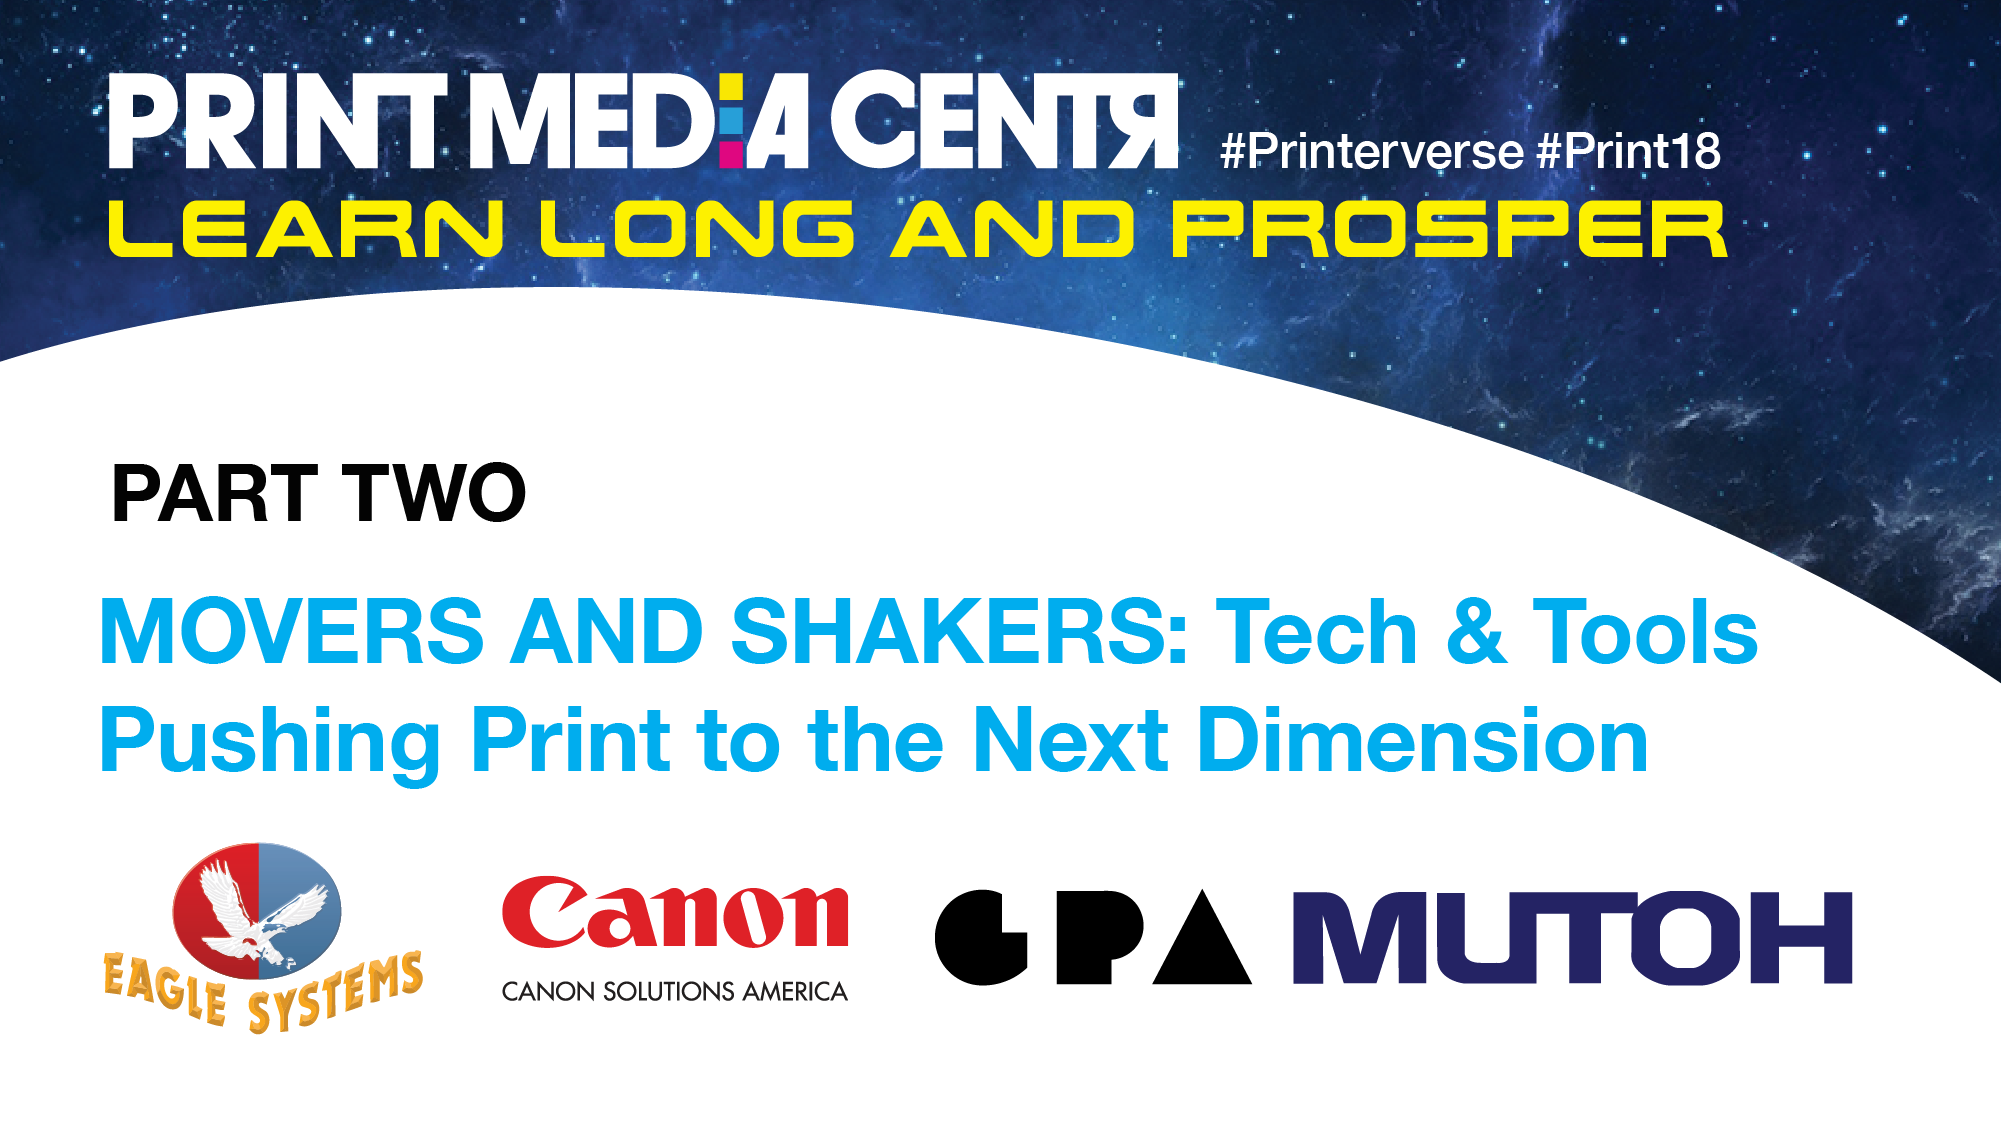 Movers Shakers Print Media Centr